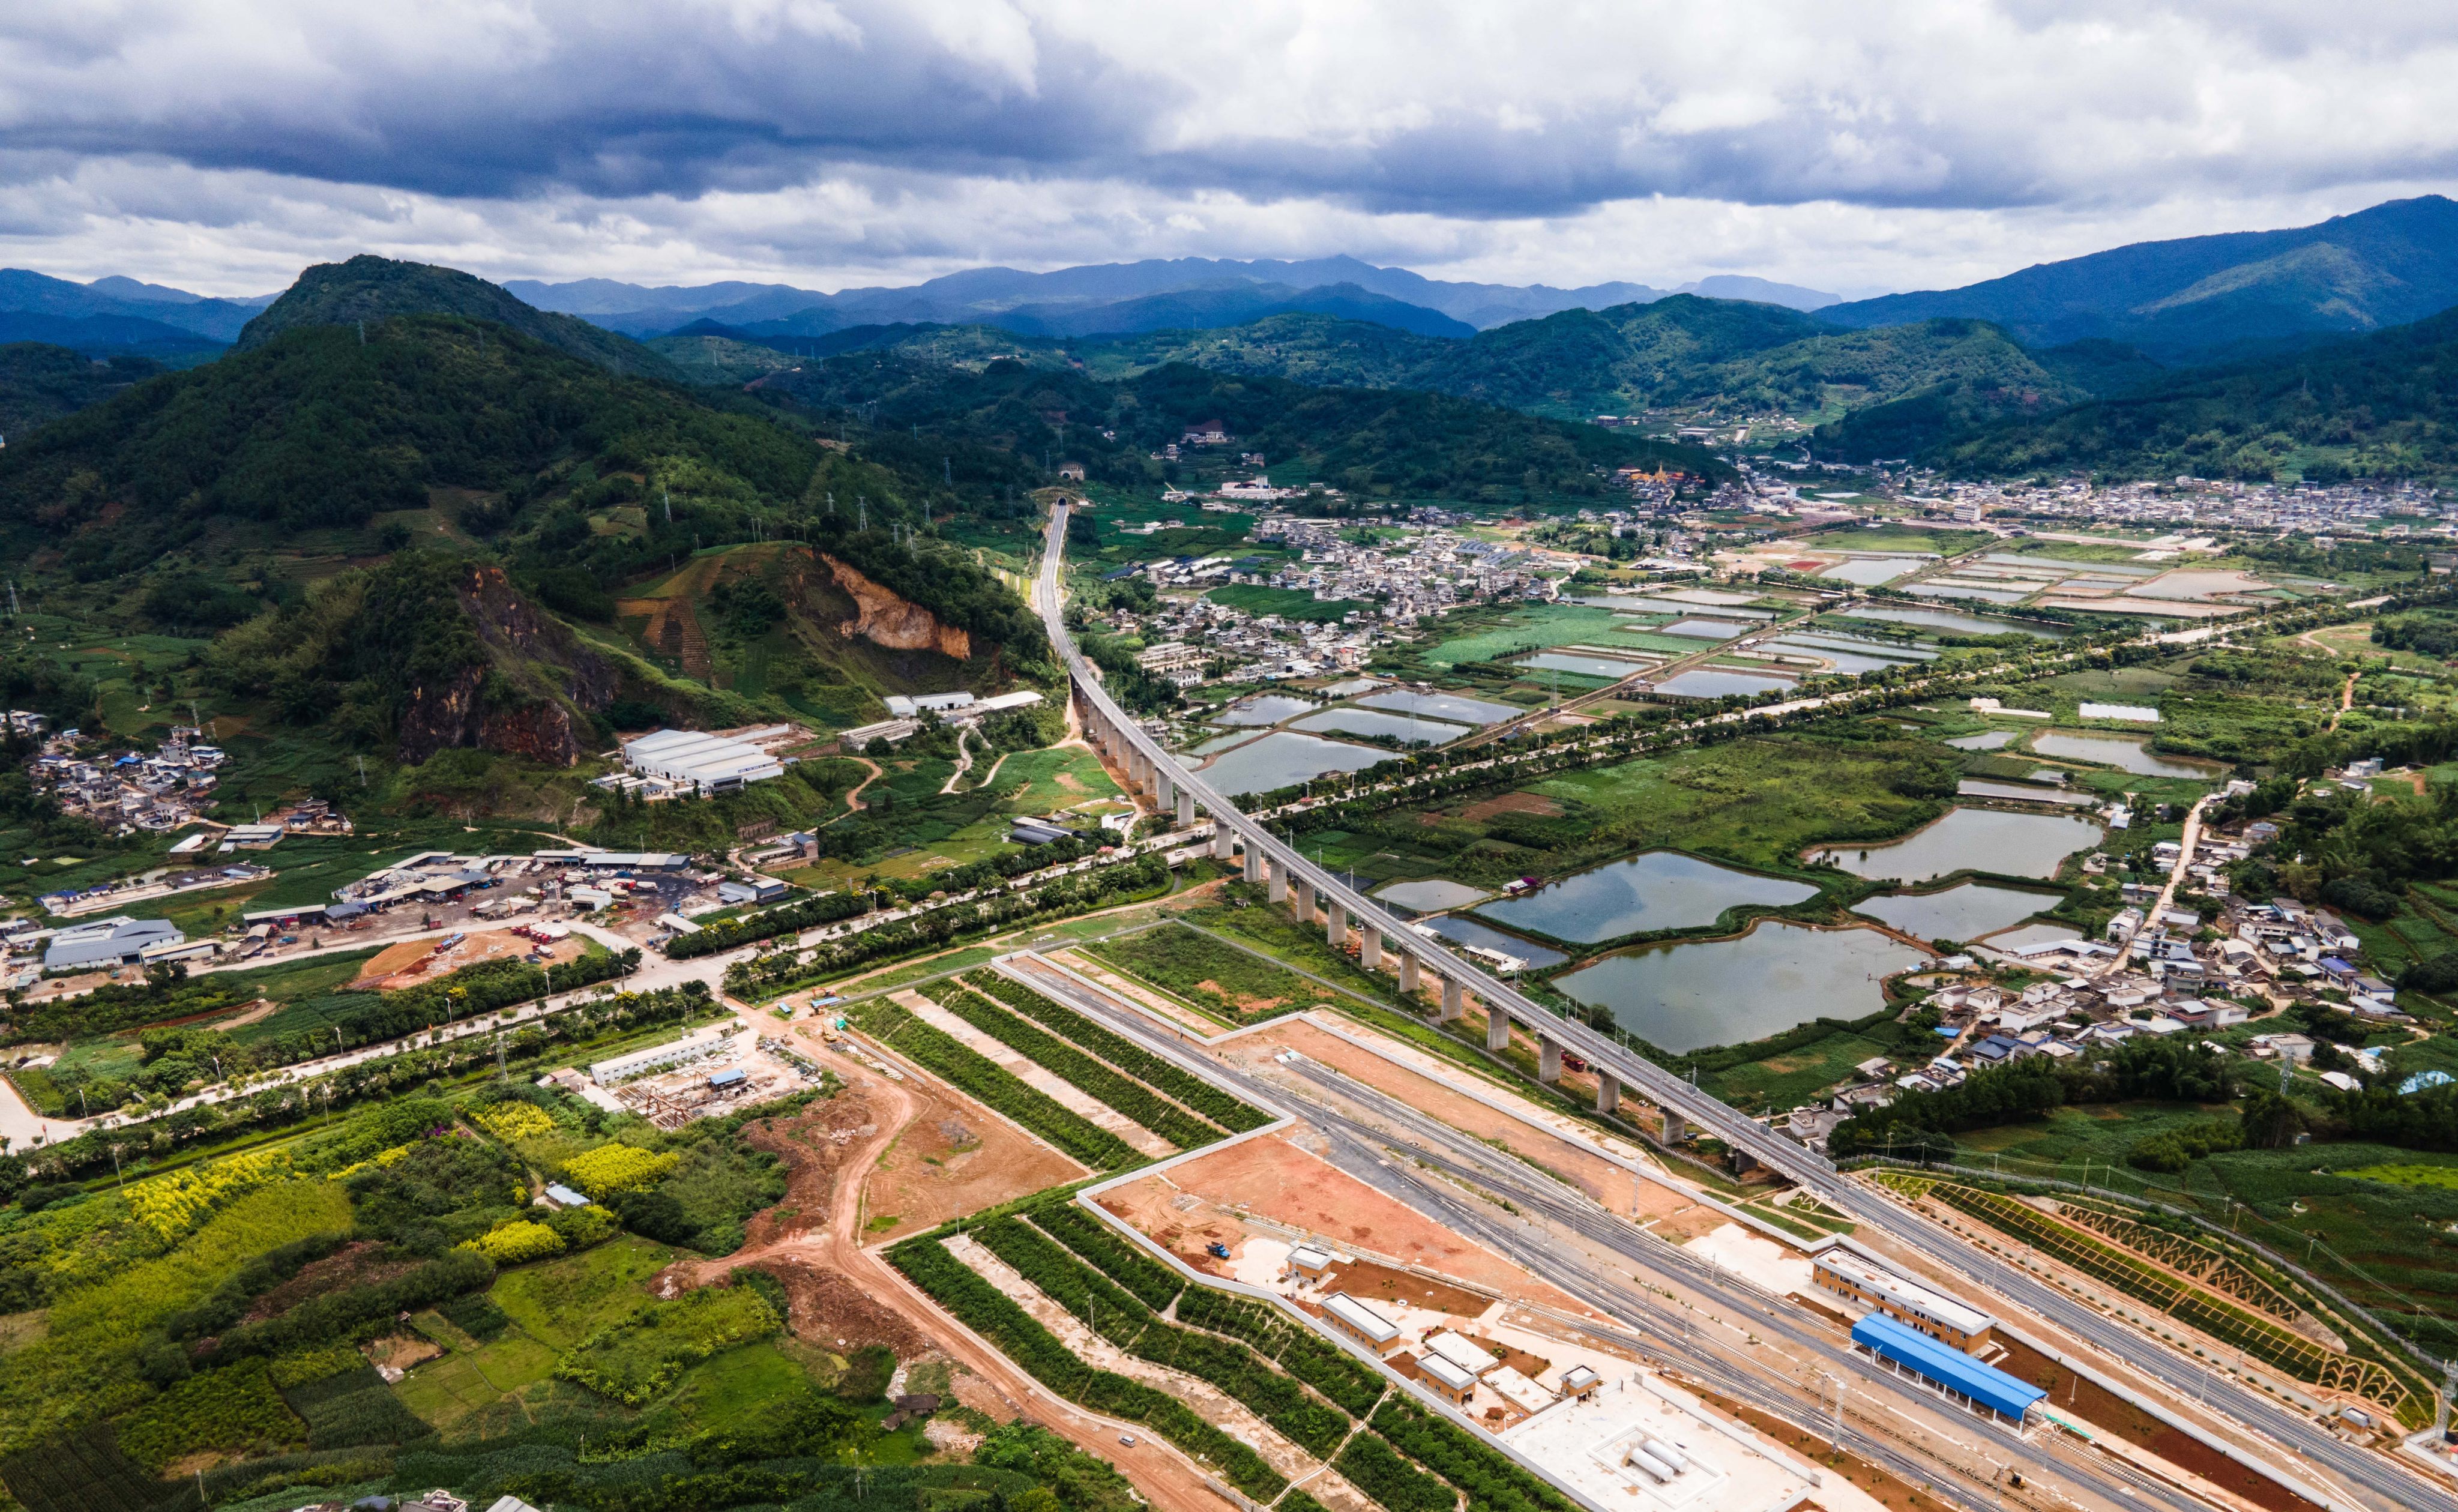 A section of the China-Laos railway under construction in Ning’er Hani and Yi Autonomous County of Puer City, southwest China’s Yunnan Province, on July 2, 2021. Photo: Xinhua